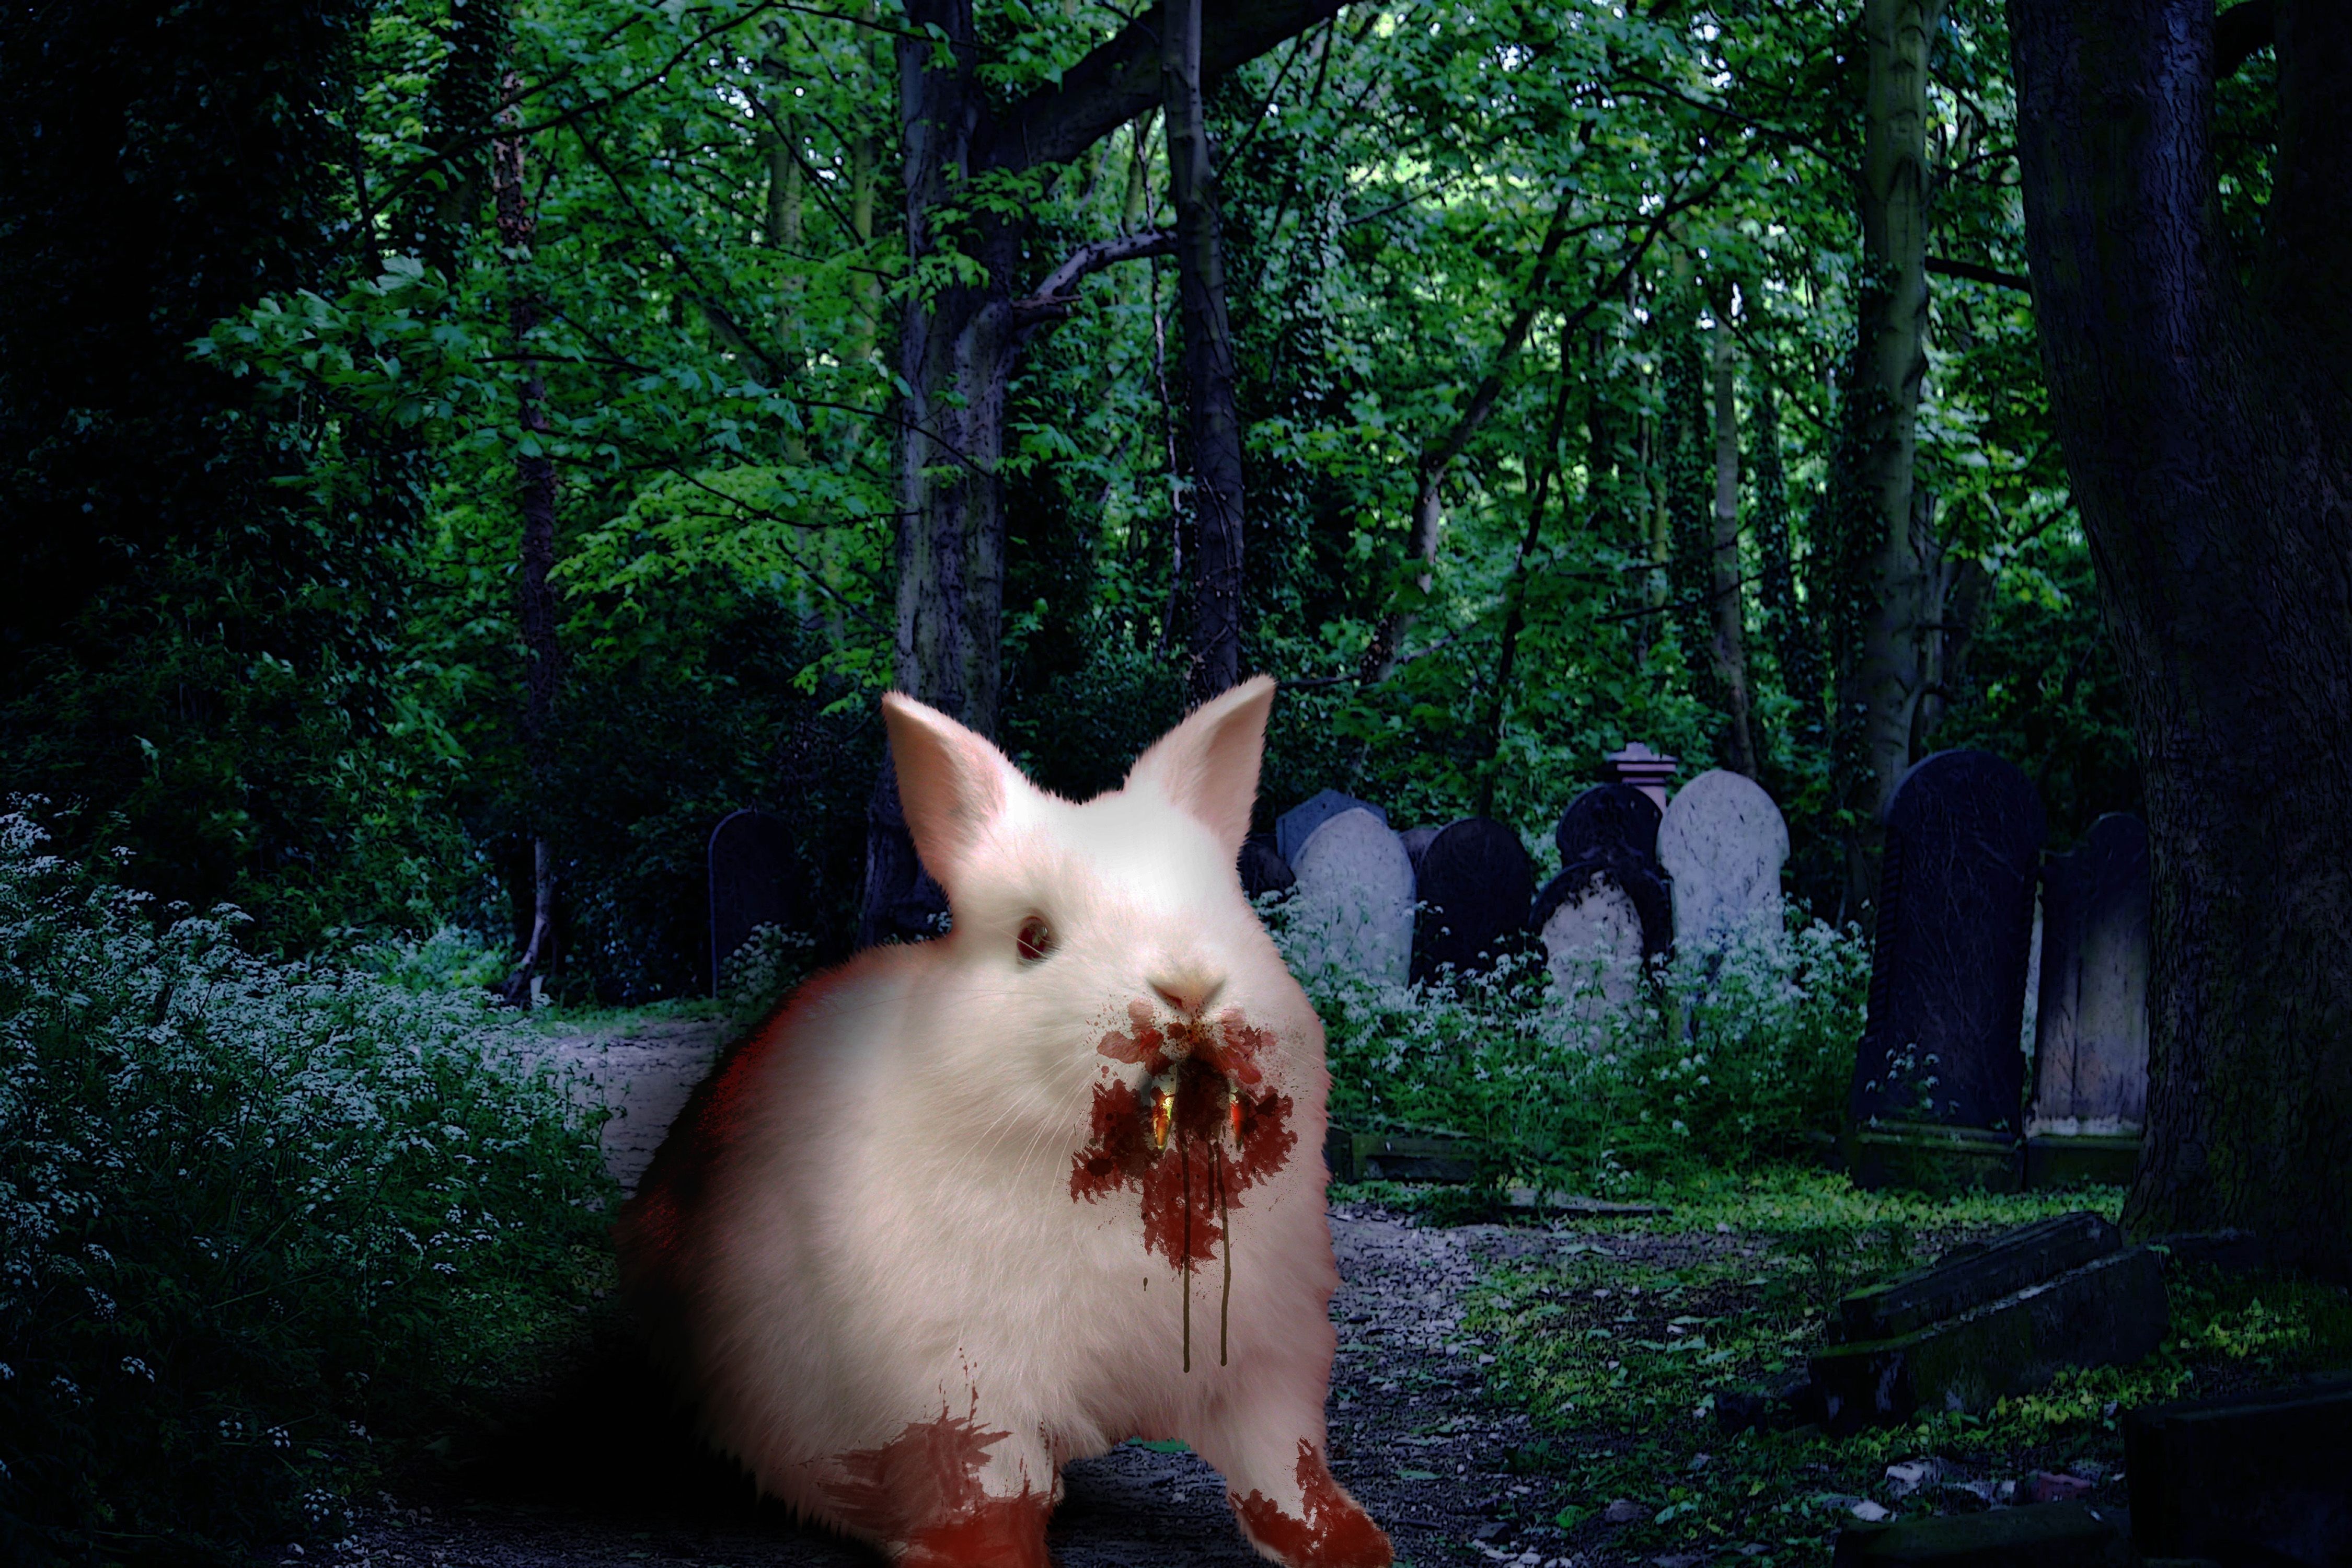 Killer Bunny picture, by kyluvlee for: demon animals photohop contest